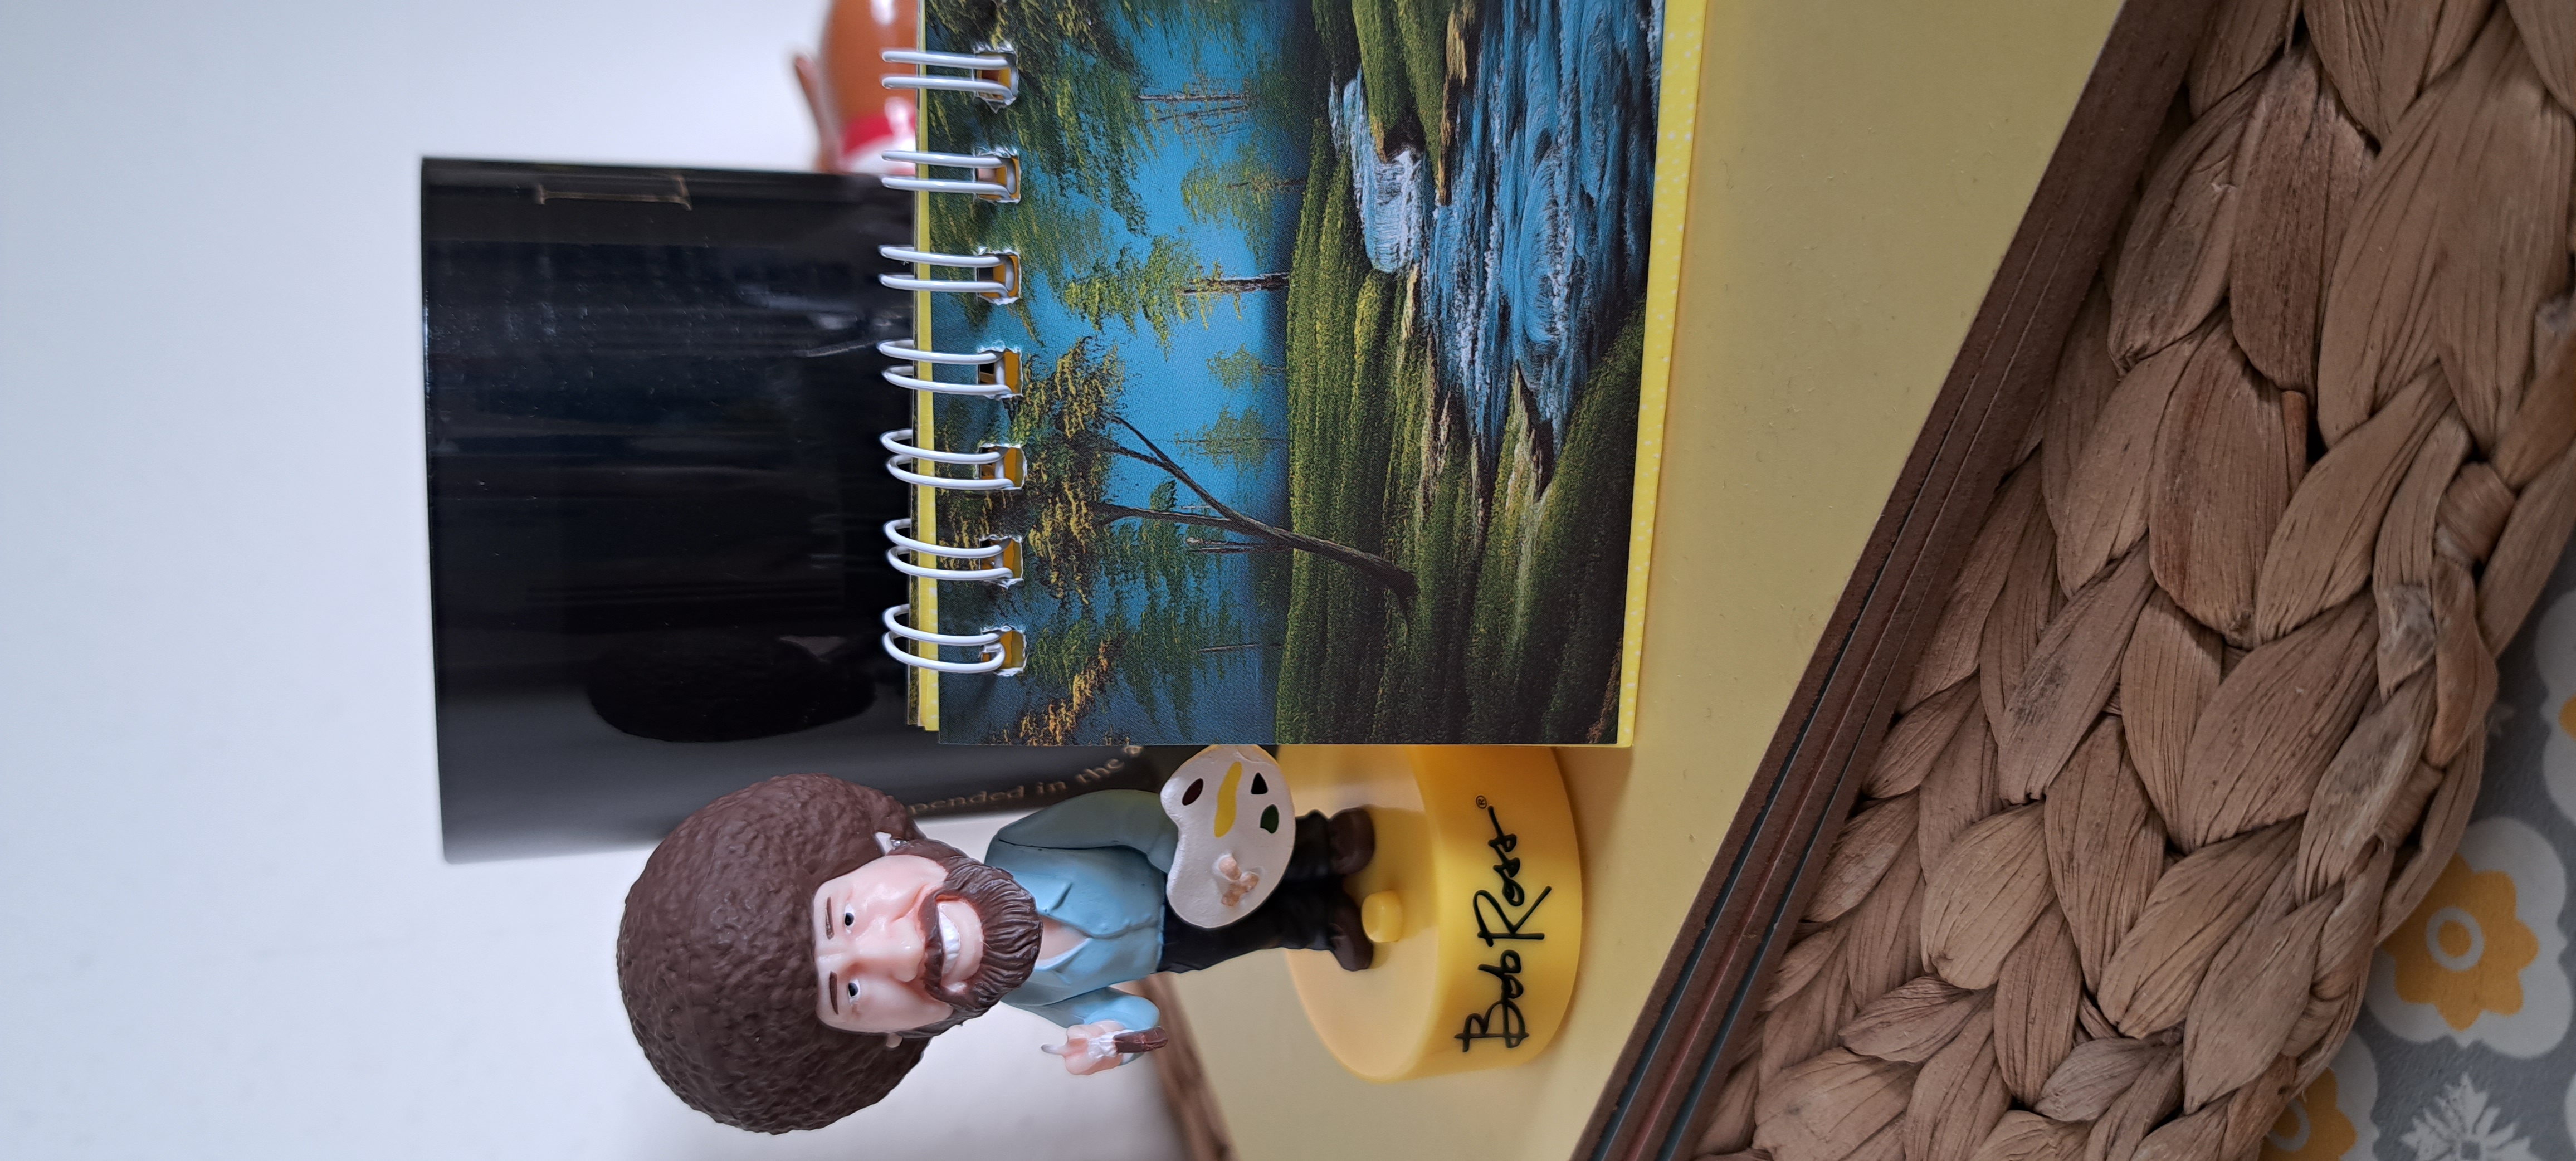 Bob Ross Bobblehead: With Sound!